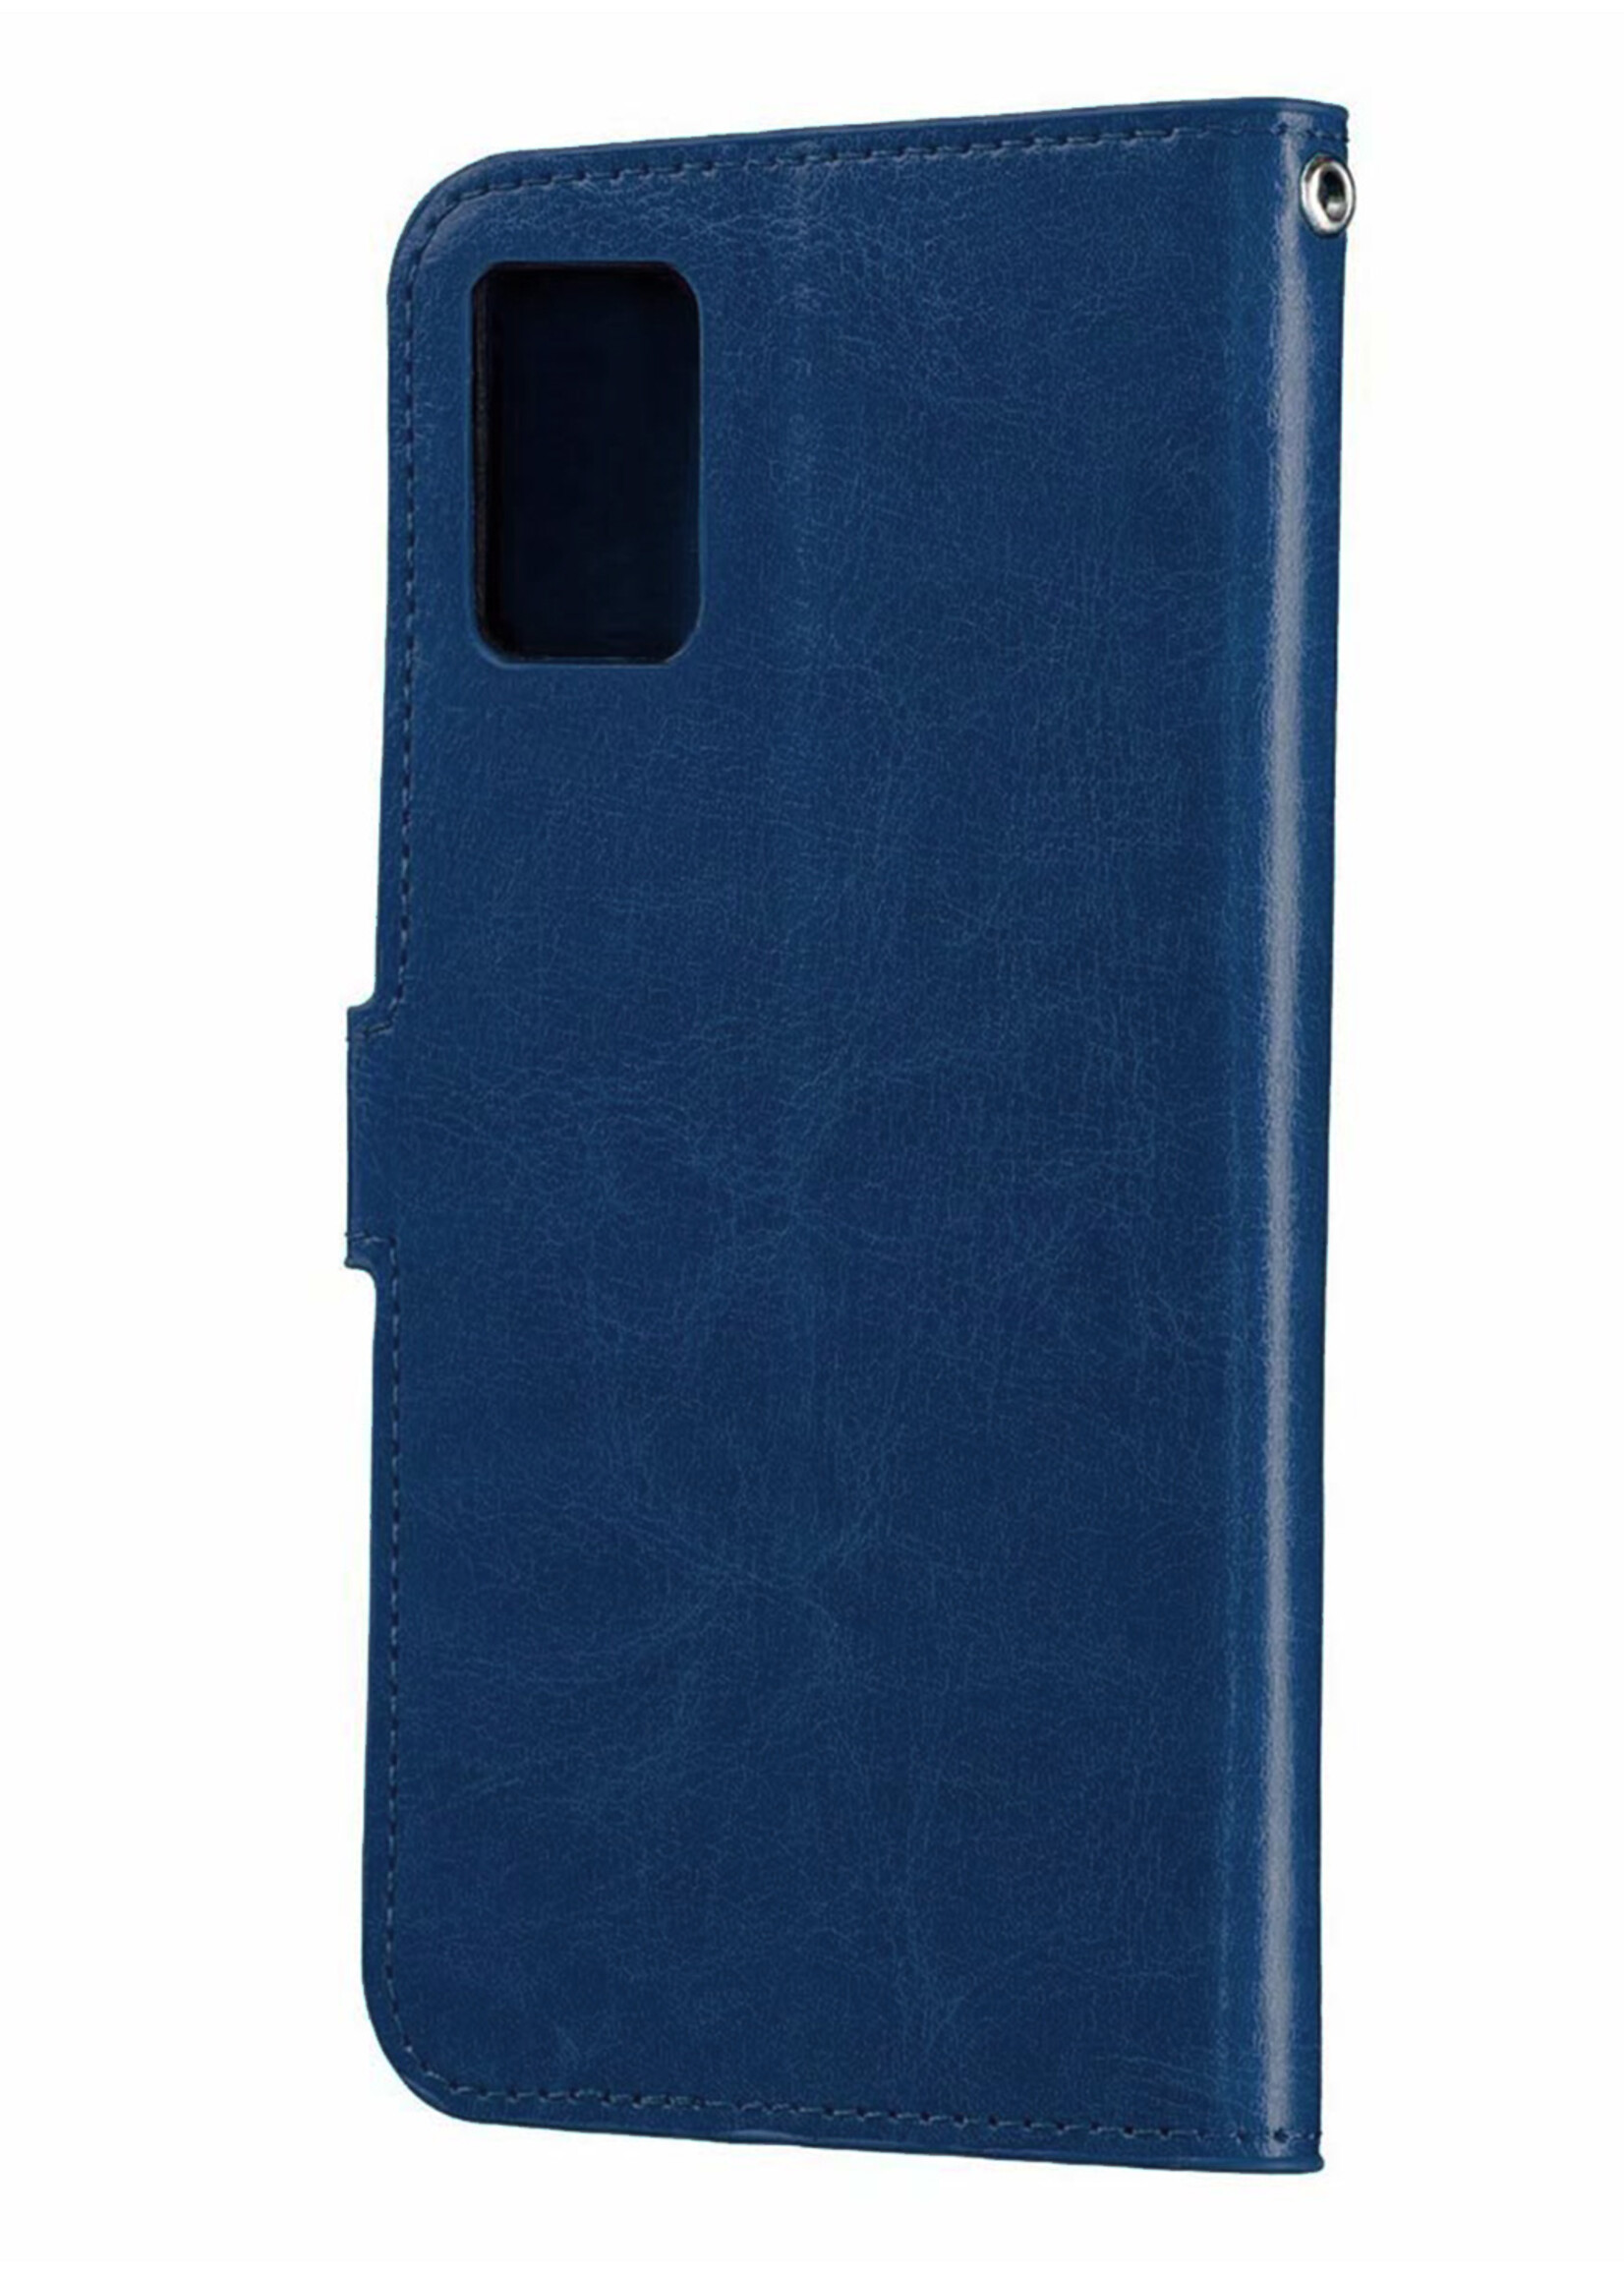 BTH Samsung A51 Hoesje Book Case Hoes Portemonnee Cover Walletcase - Samsung A51 Hoes Bookcase Hoesje - Donkerblauw